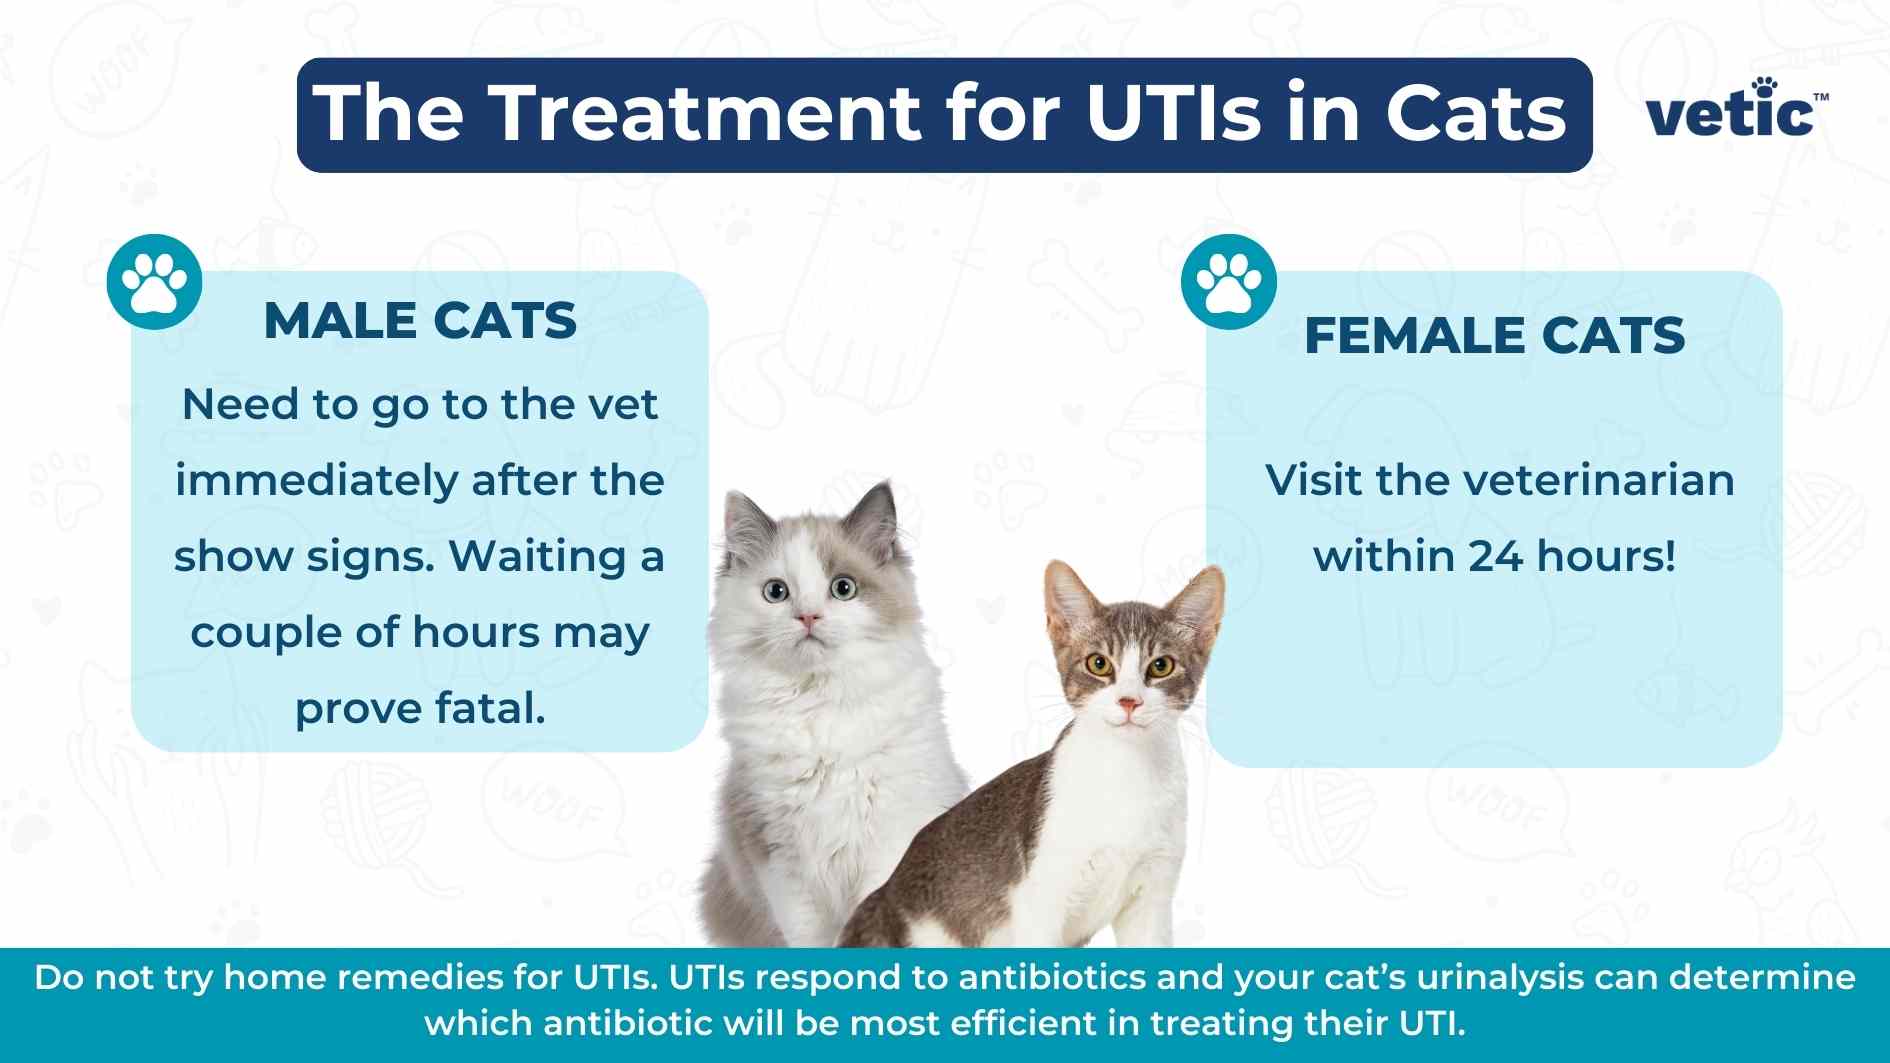 Inforgaphic by Vetic on the treatment for UTIs in cats. UTI in cats can be treated effectively with antibiotics based on the urine culture and sensitivity test by the vet. for male cats, UTIs are typically always an emergency and they need to go to the vet immediately after they begin to show signs. Female cats need to go to the vet within 24 hours of showing the signs